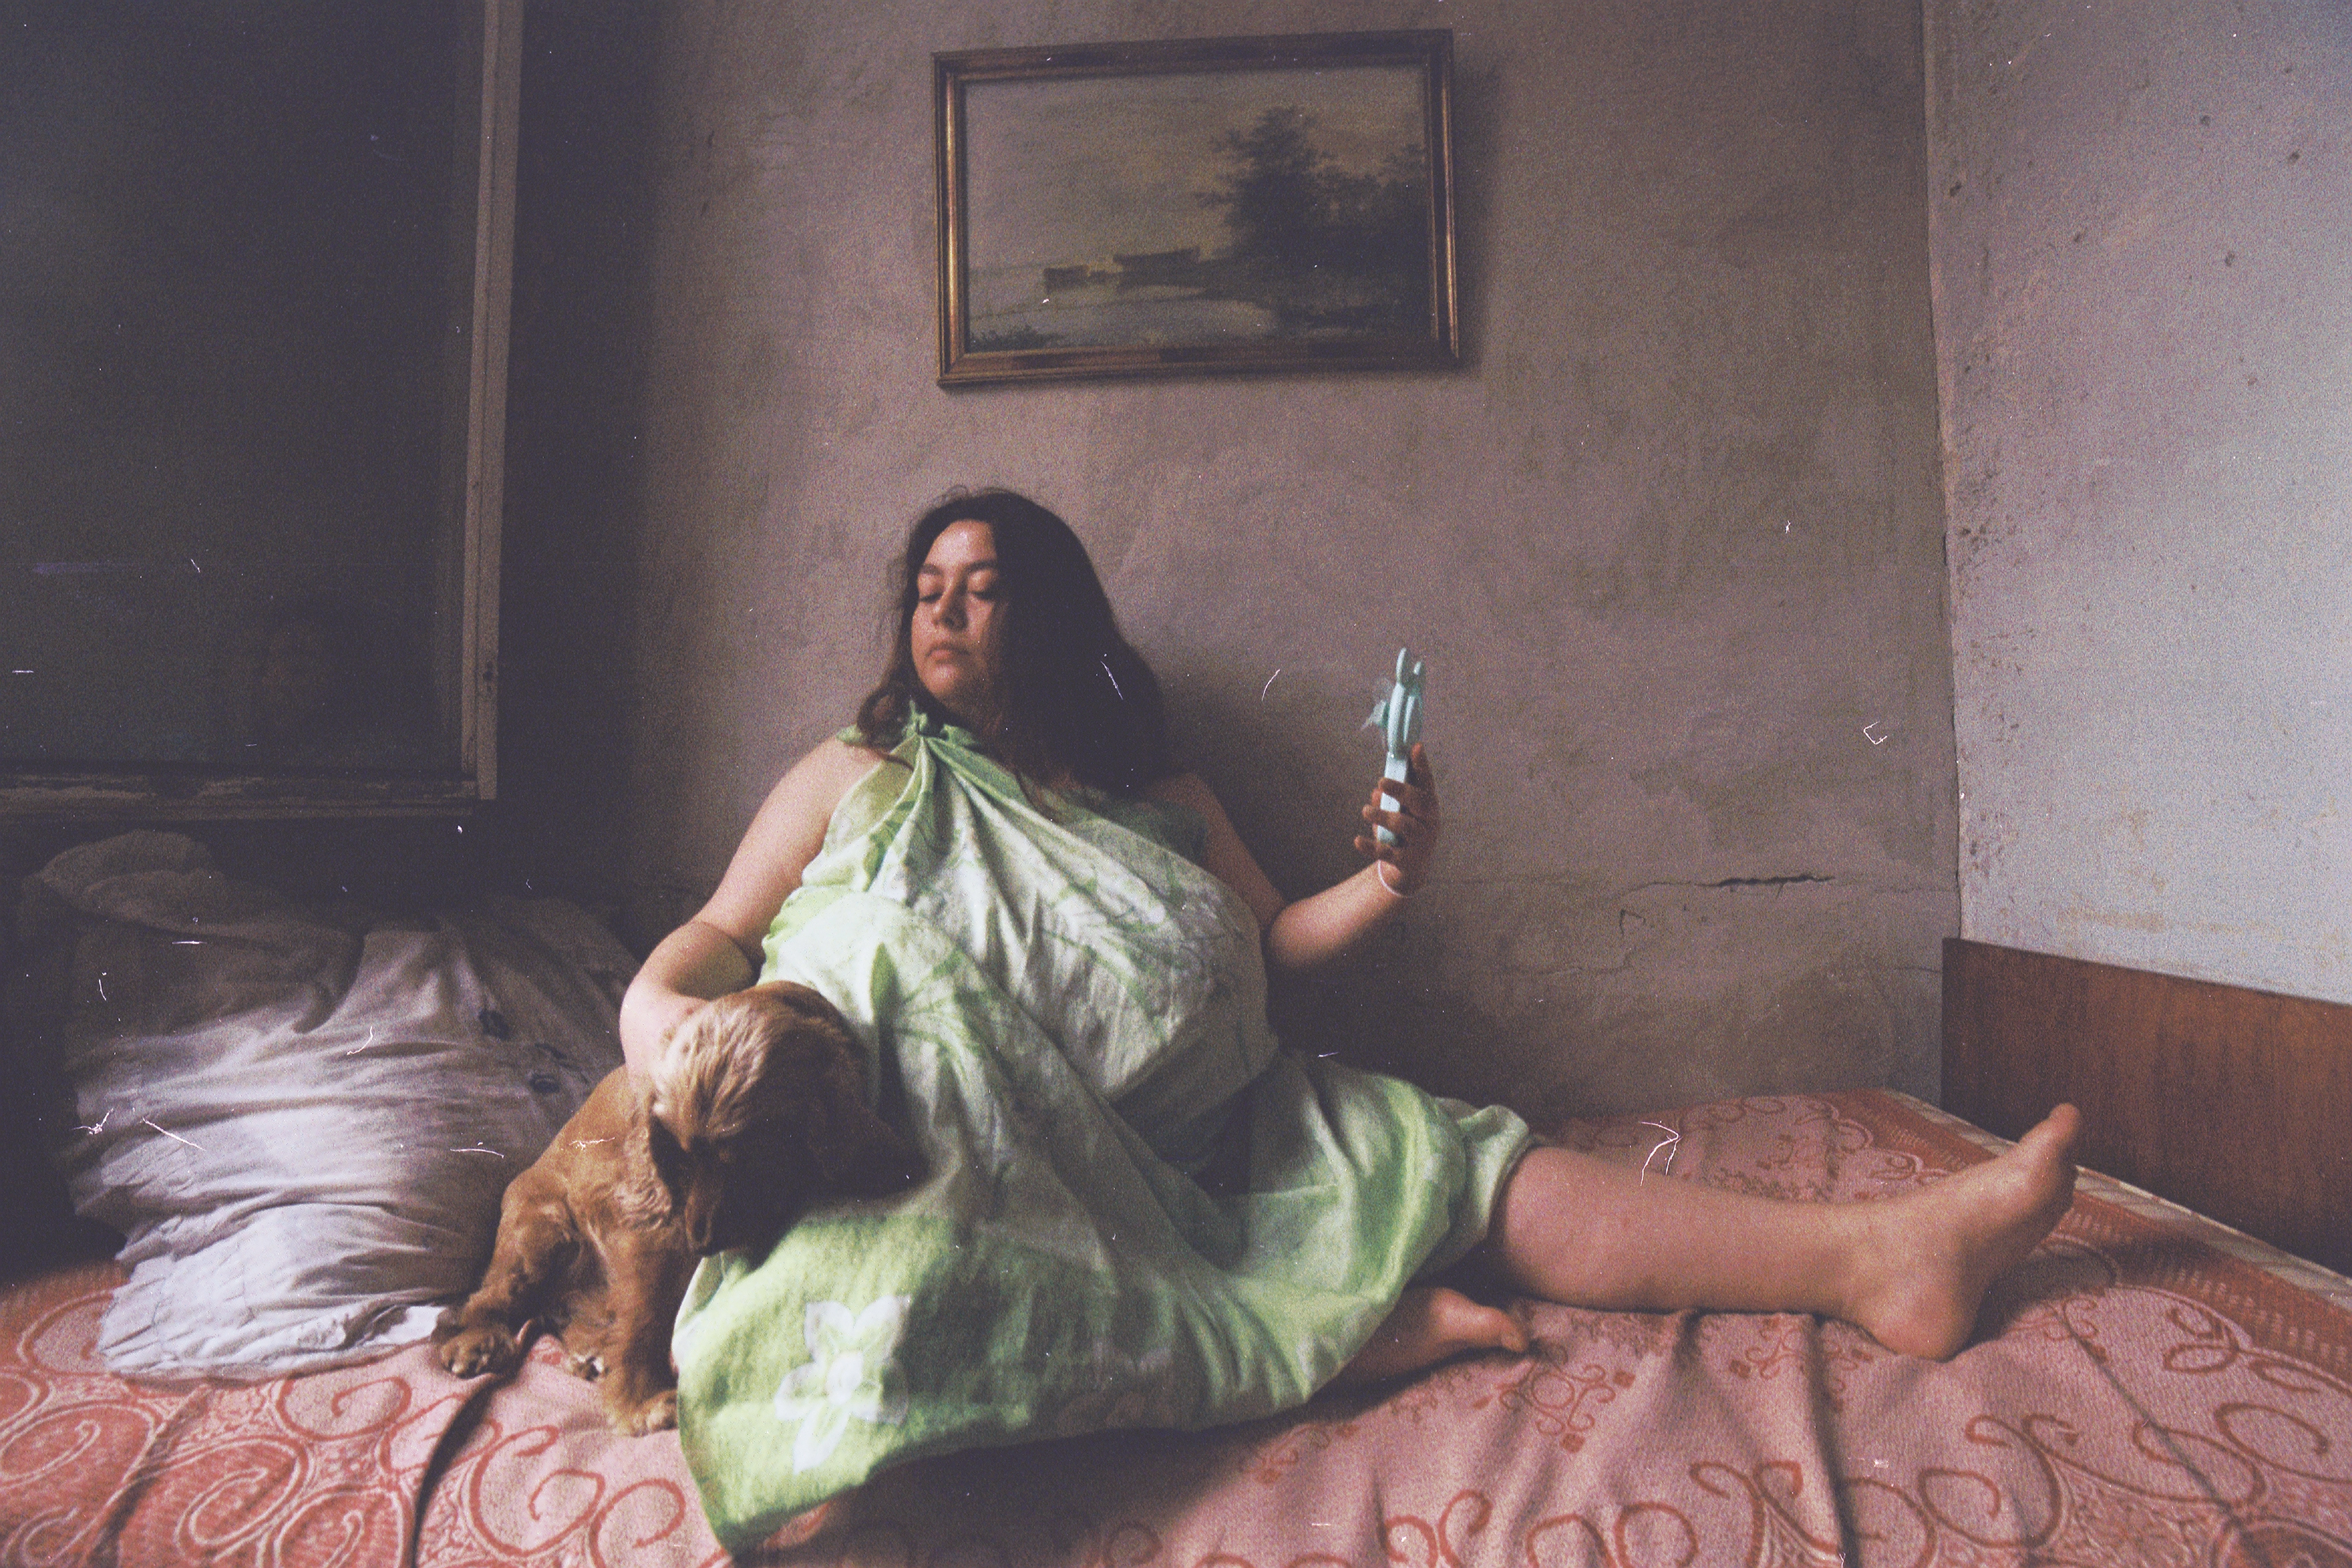 portrait of a woman sitting with her dog on her bed holding her mobile phone in her hand - photo by Sona Mnatsakanyan.